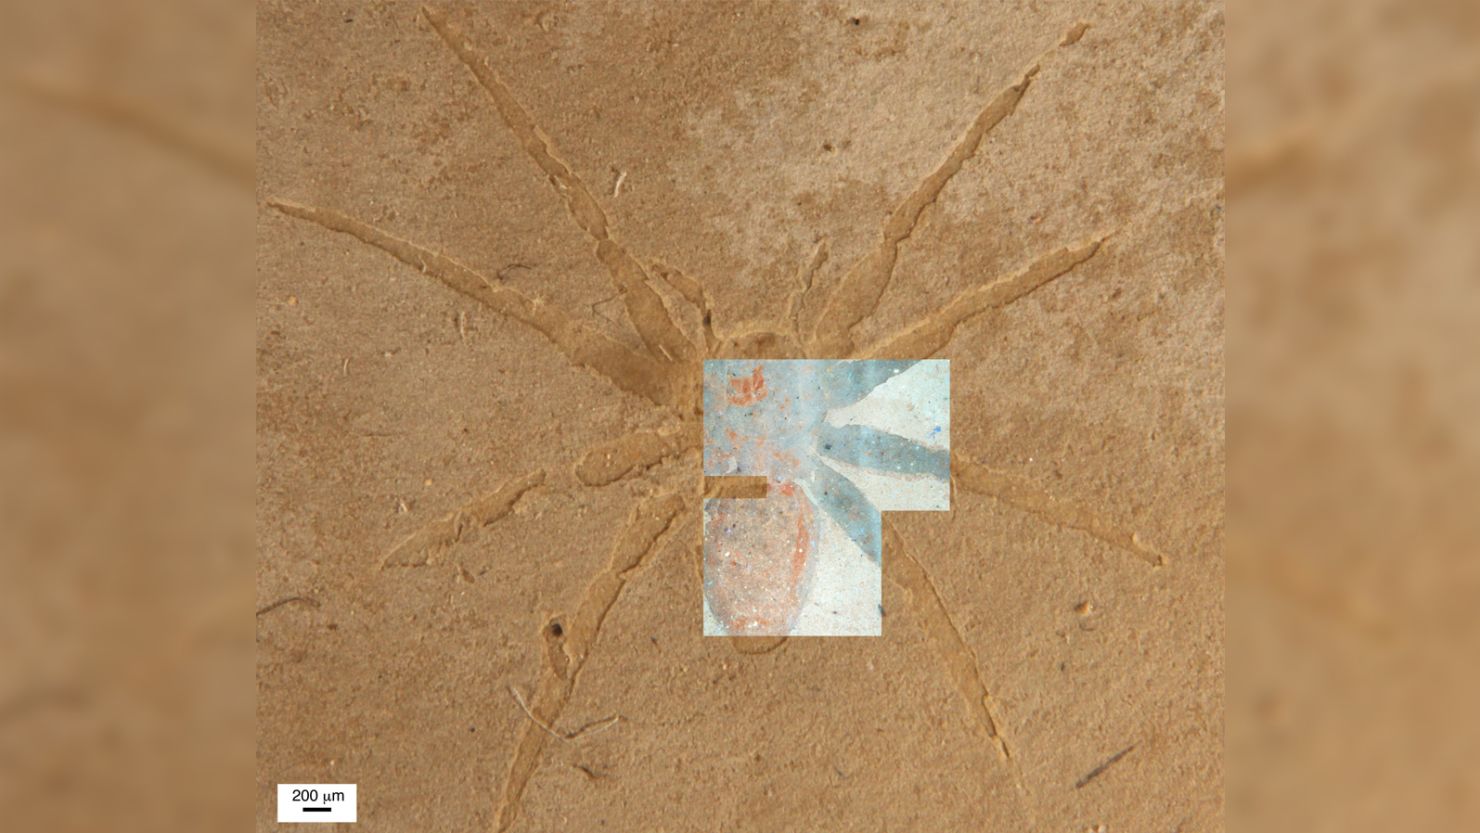 The spider fossil is hard to differentiate from the rock. But when the fossil is studied under a fluorescent microscope, its chemical composition causes it to glow brightly, revealing additional details. 